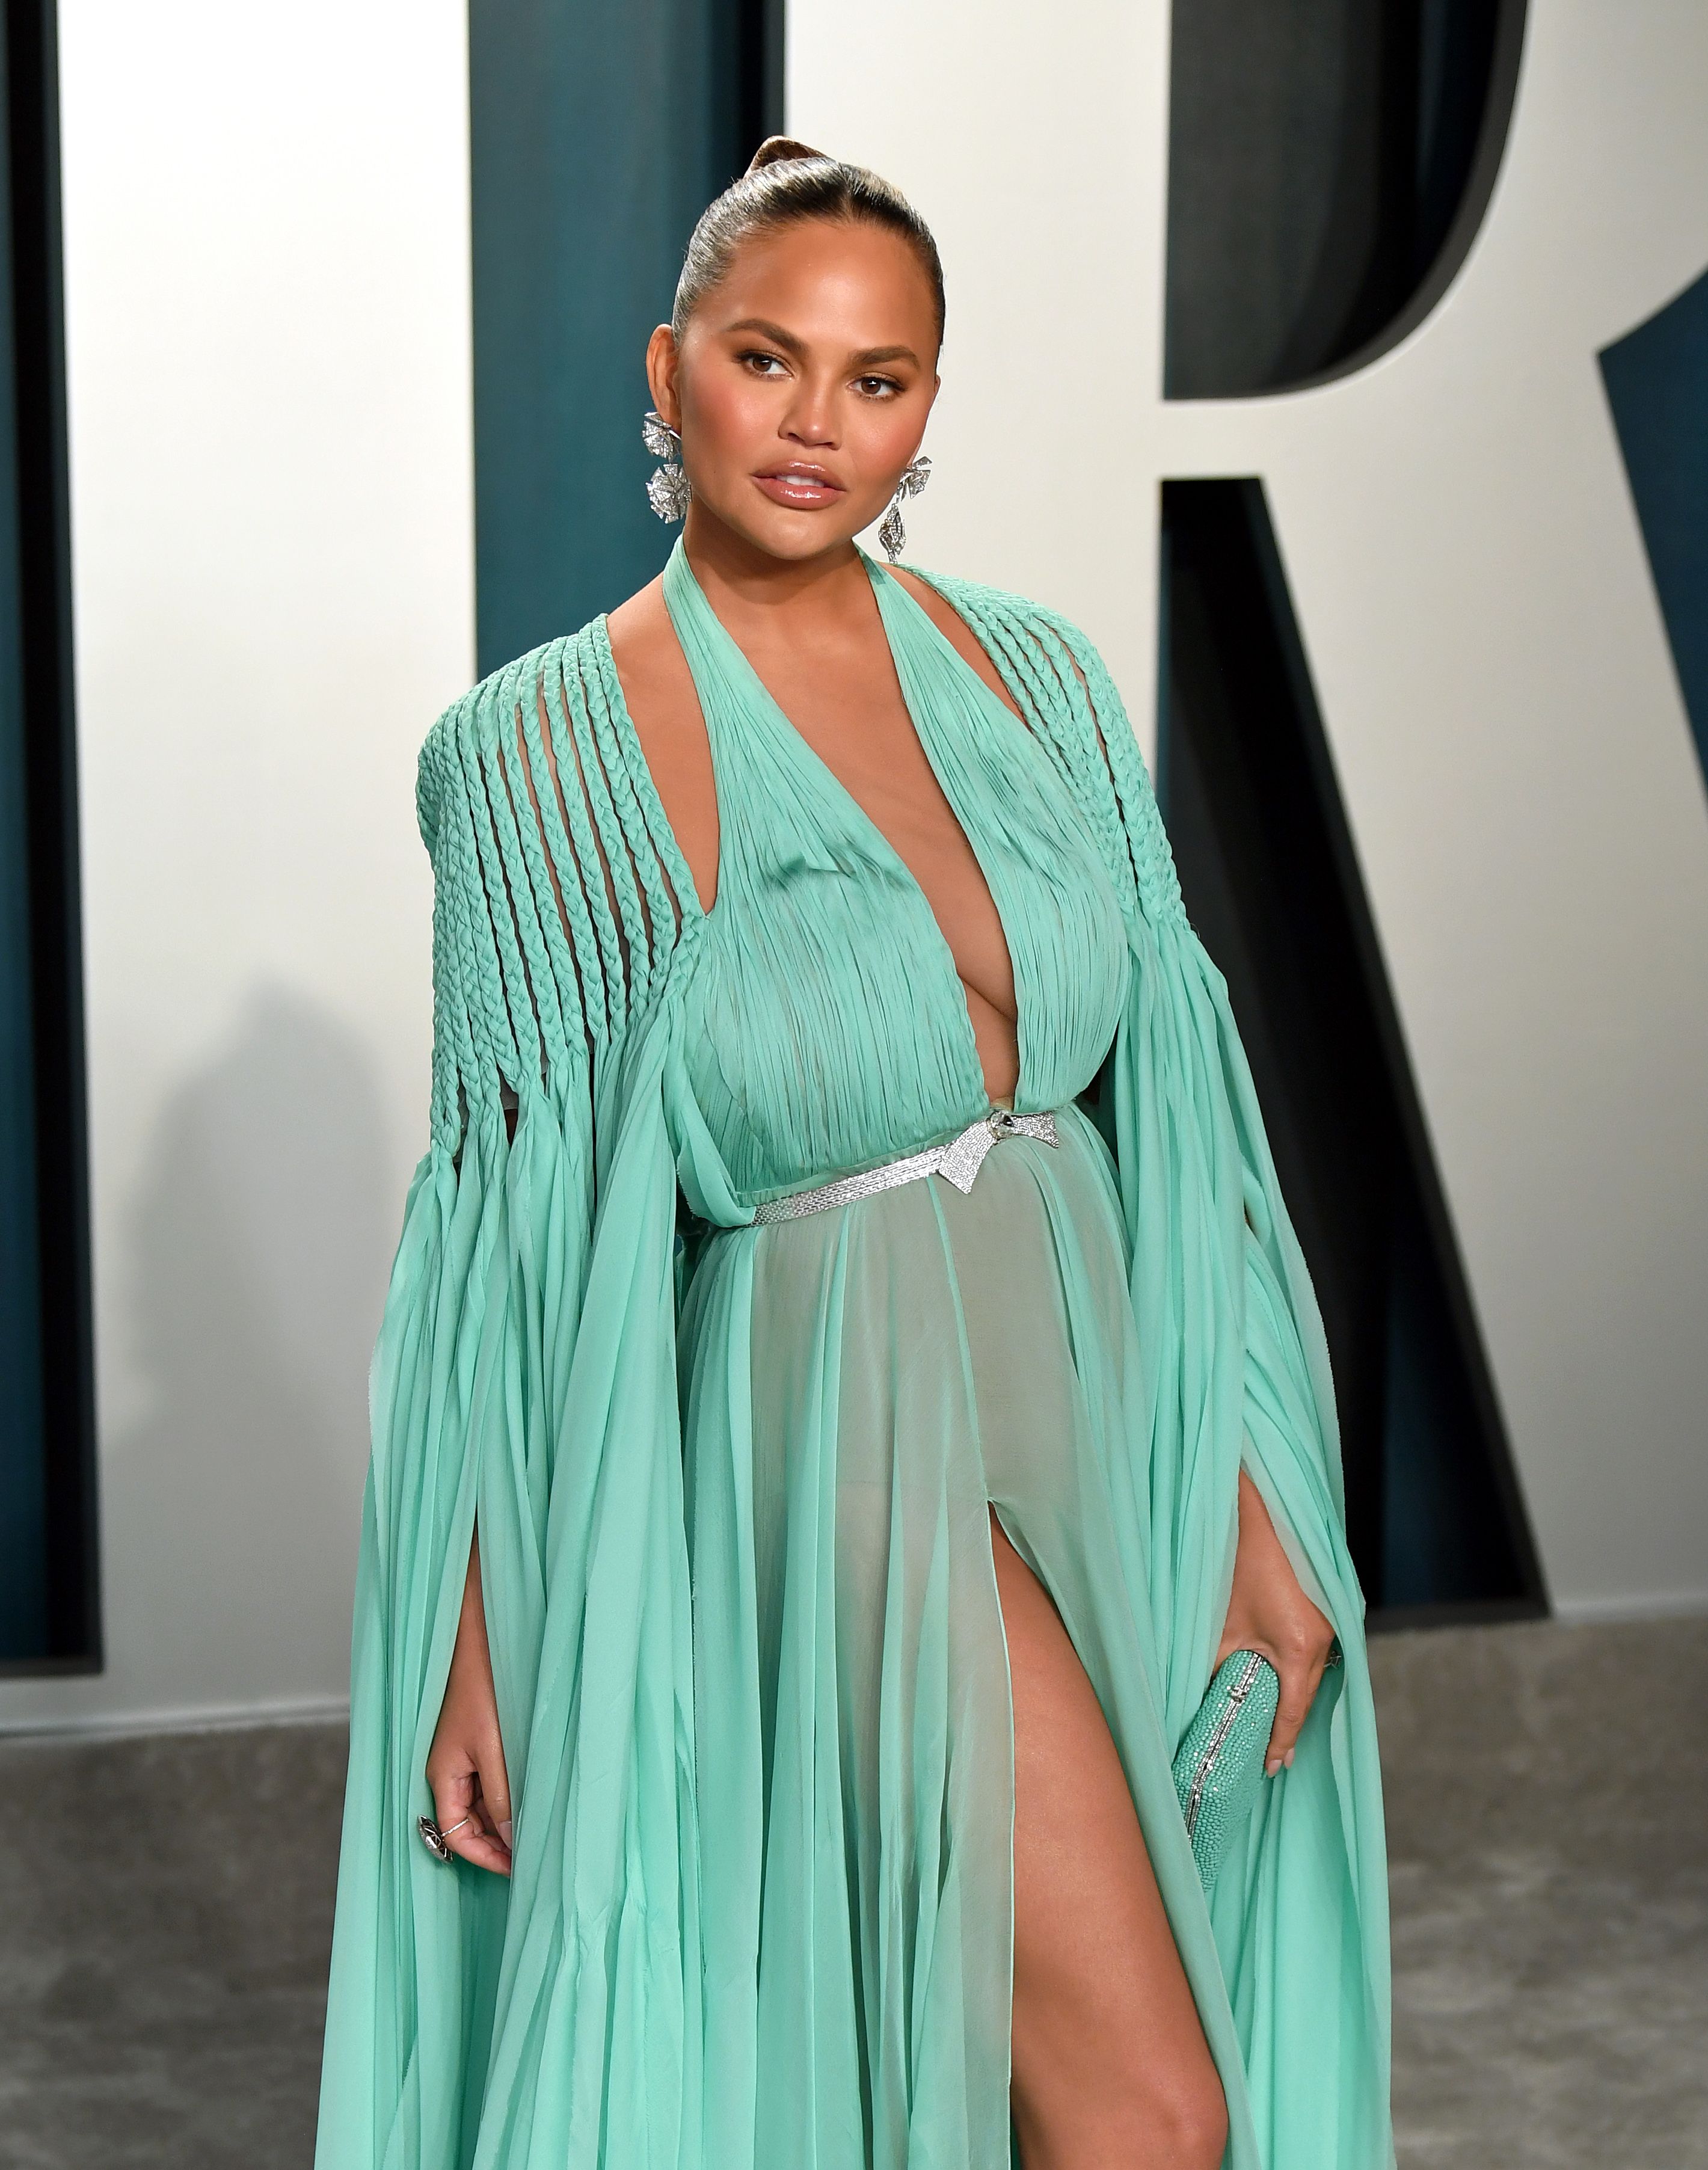 Chrissy Teigen attends the 2020 Vanity Fair Oscar Party hosted by Radhika Jones at Wallis Annenberg Center for the Performing Arts on February 09, 2020 in Beverly Hills, California. | Source: Getty Images